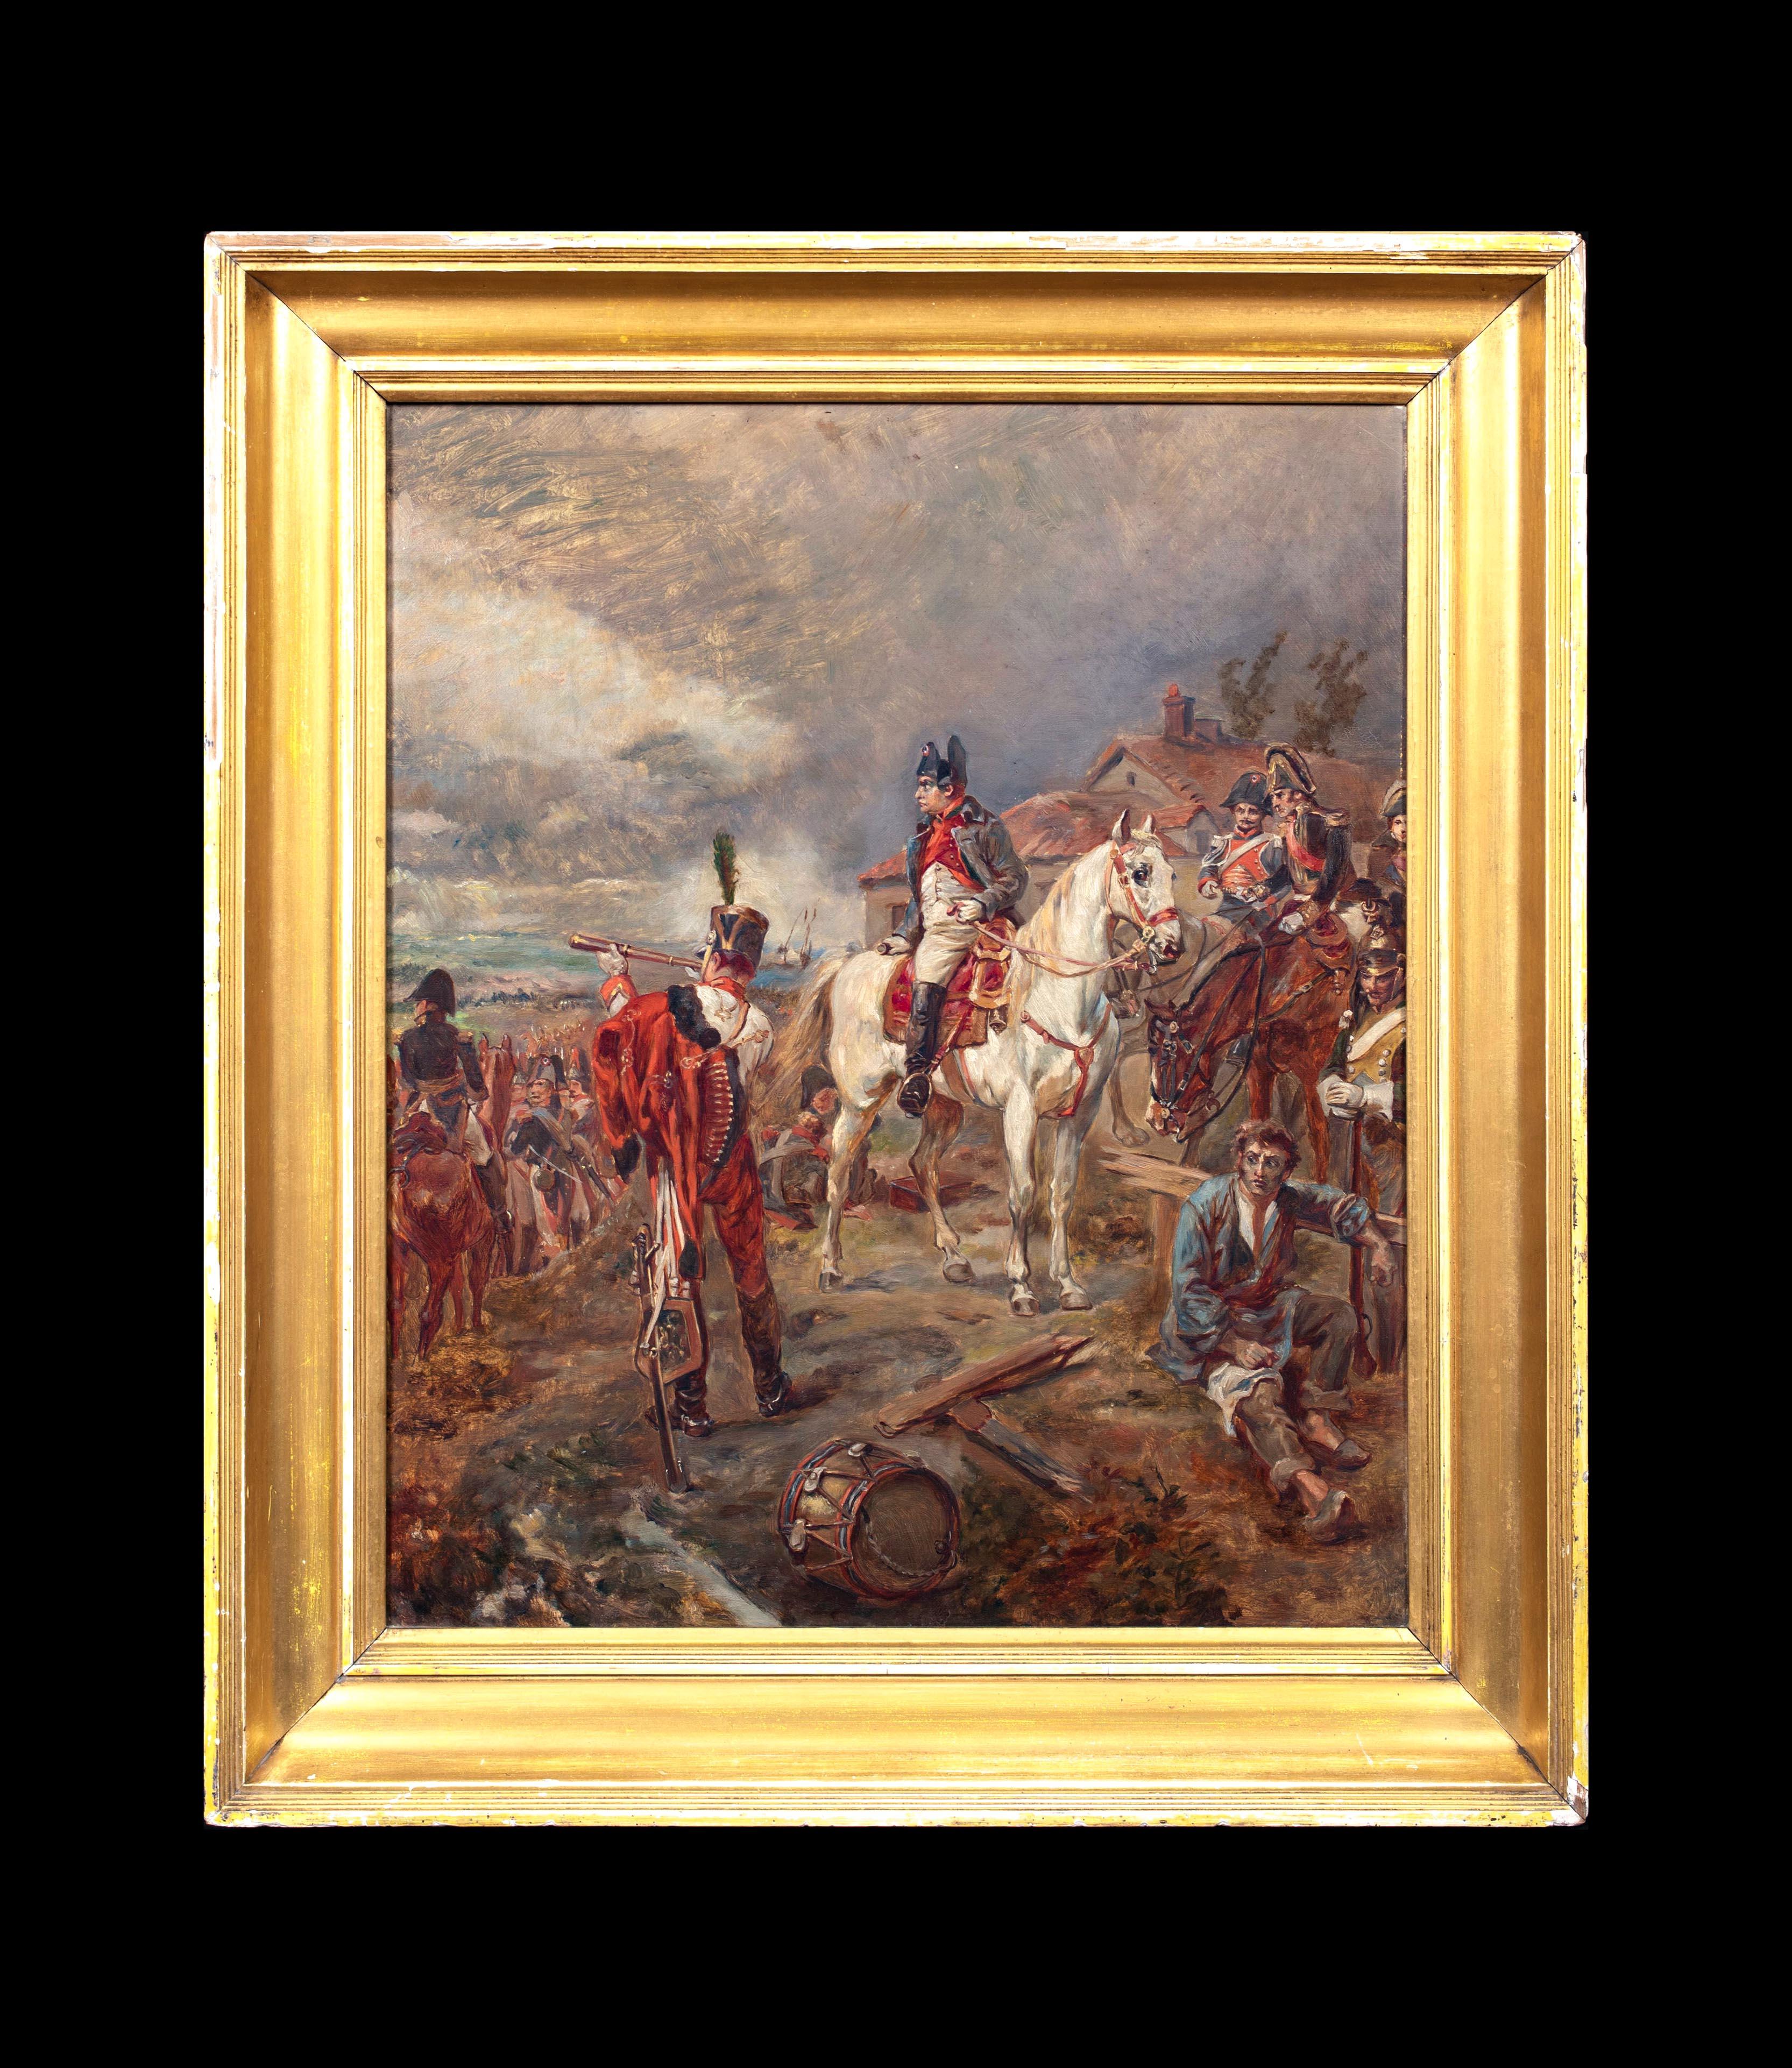 Napoleon At The Battle Of Waterloo, 19th Century  by Ernest CROFTS (1847-1911)  - Painting by Ernest Crofts